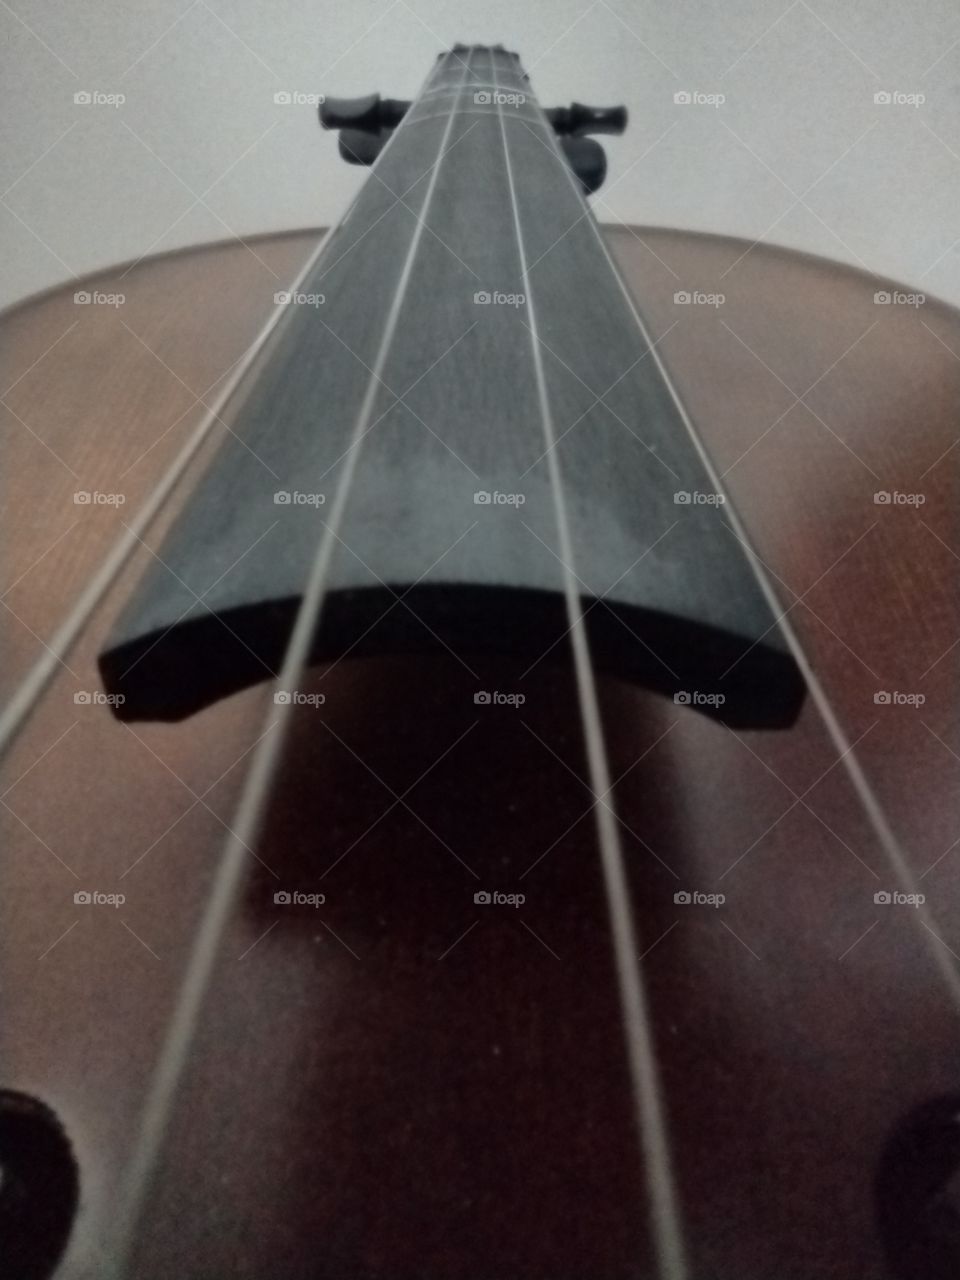 Unfiltered, beautiful, lovely close-up of violin strings